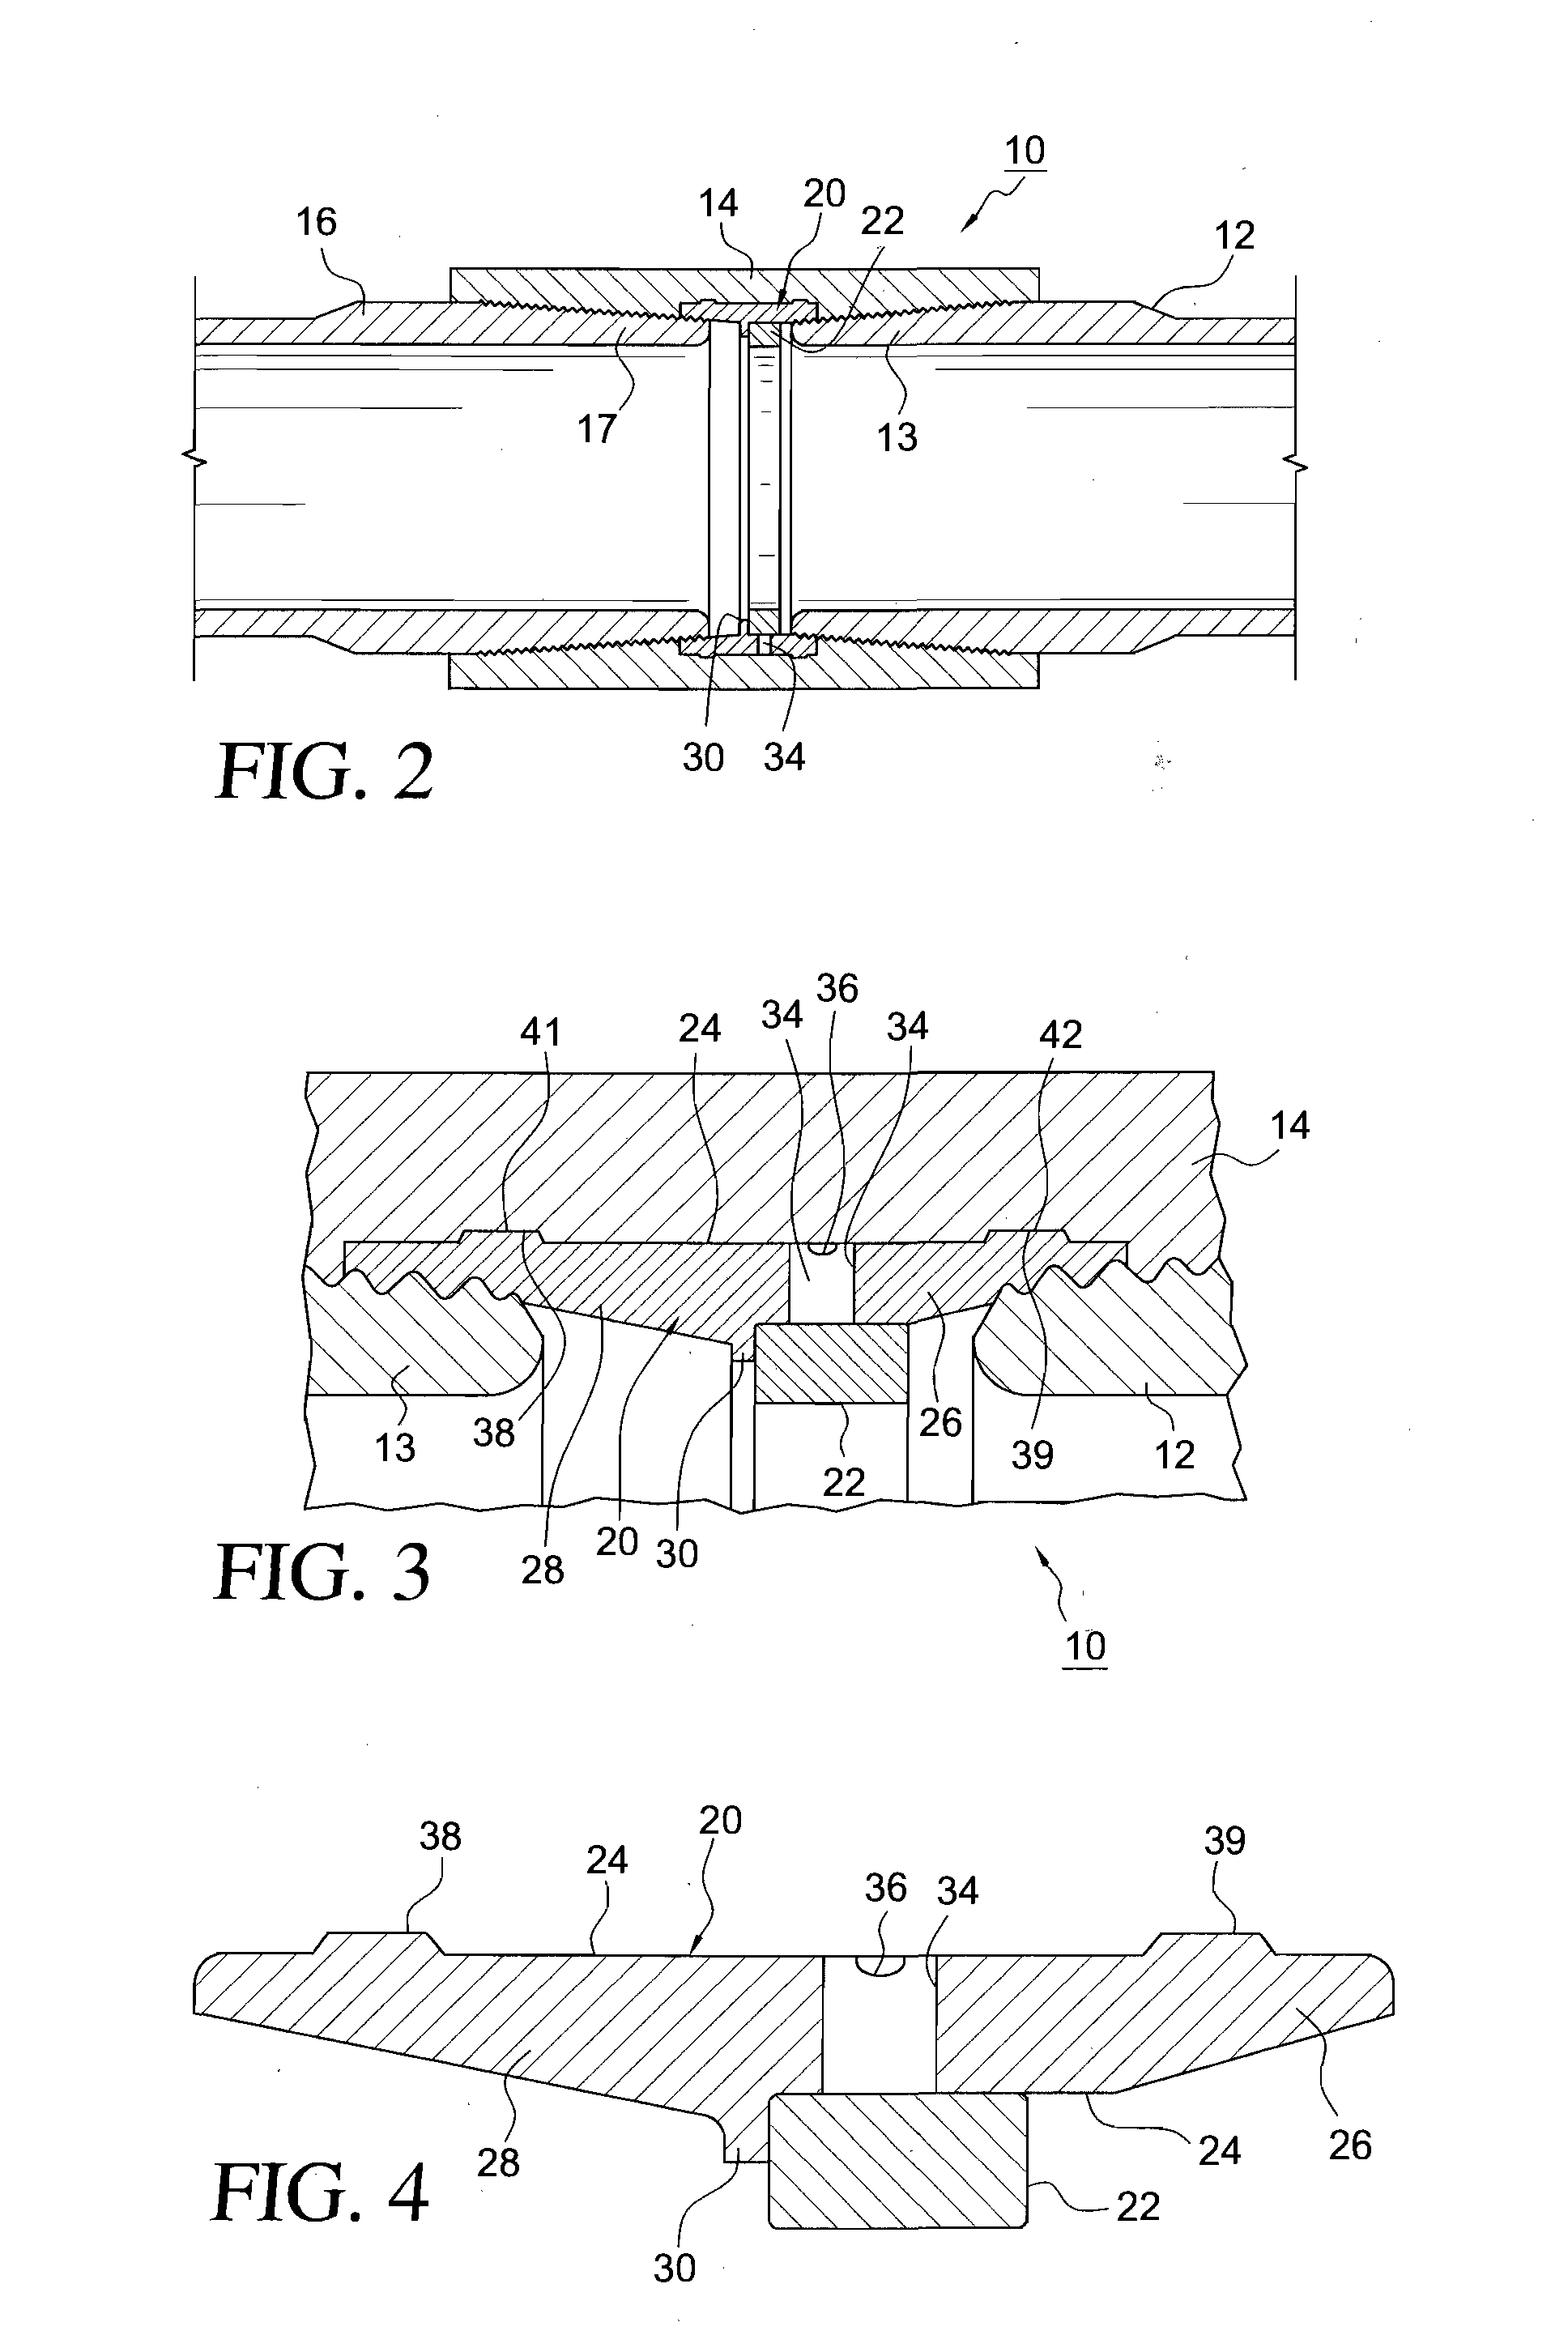 System and method for sealing couplings in downhole tubing strings